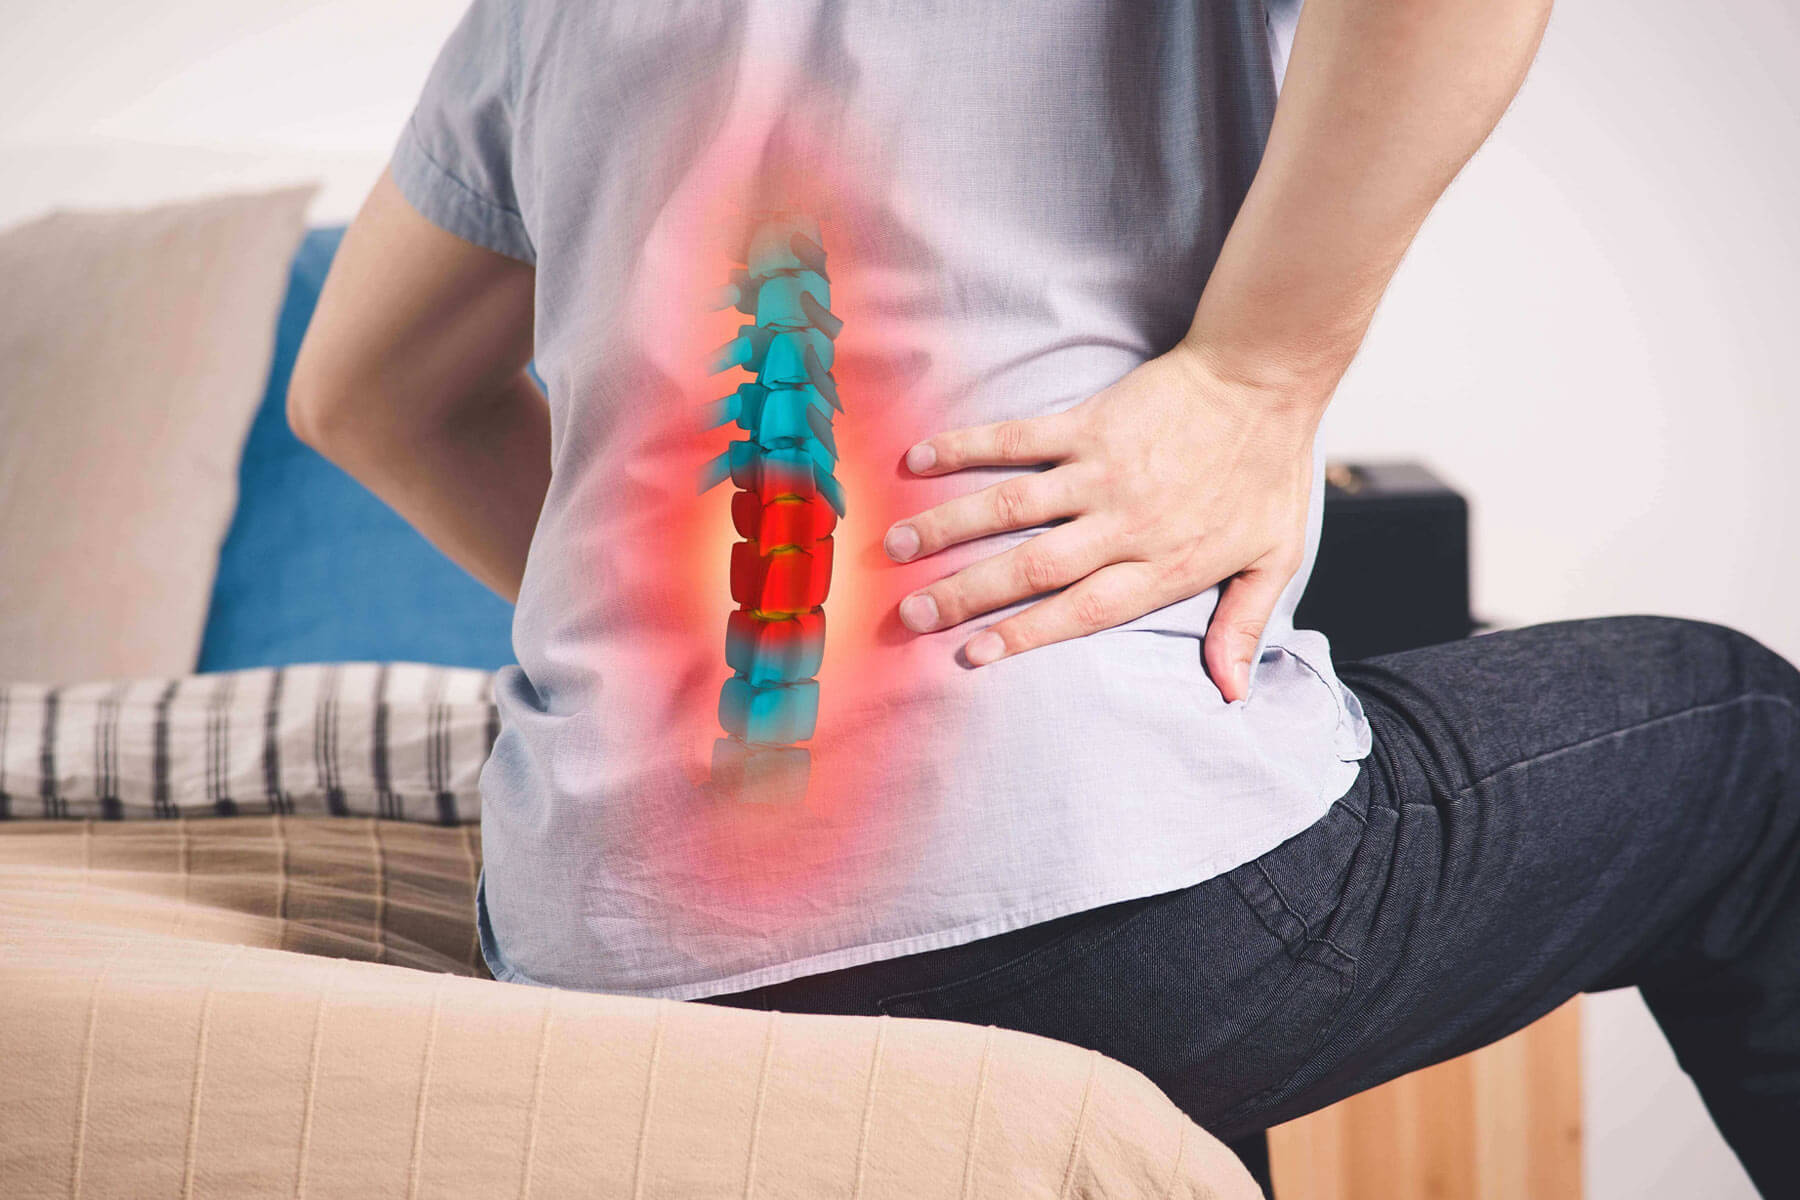 suffering from bck pin with no relief? you may have a herniated disc